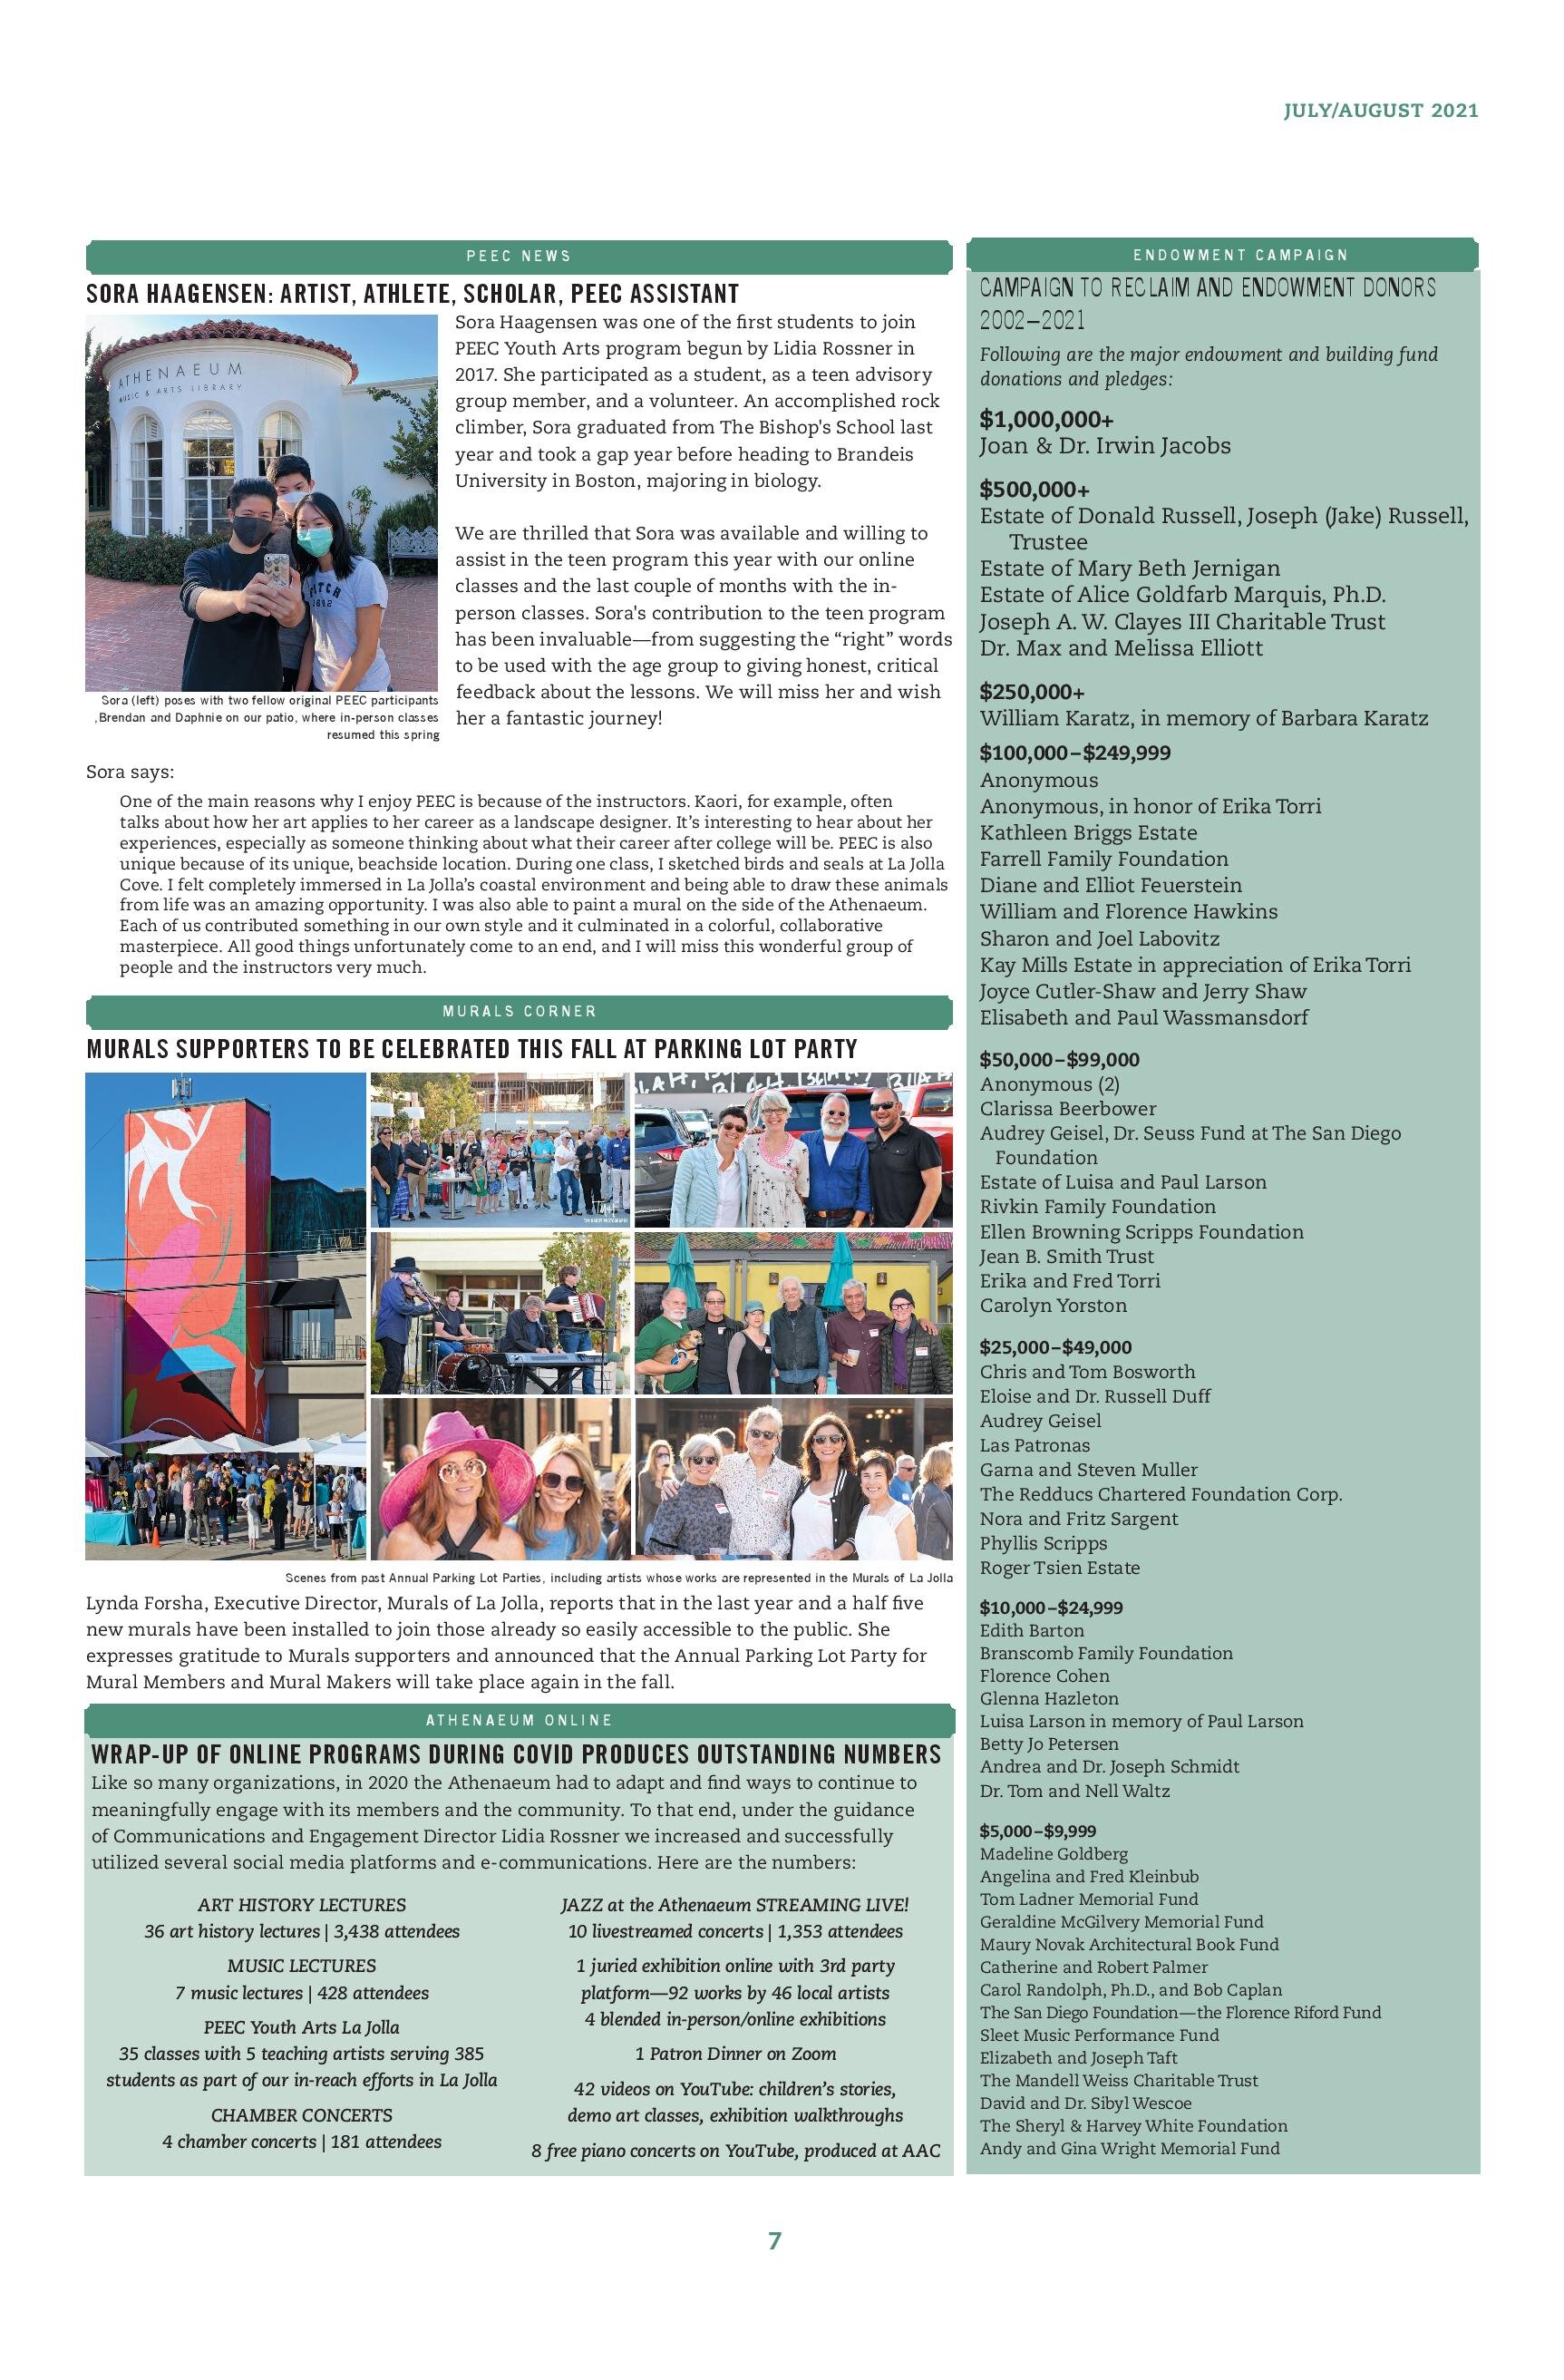 July-August 2021 Newsletter_RGB for website-page-007.jpg